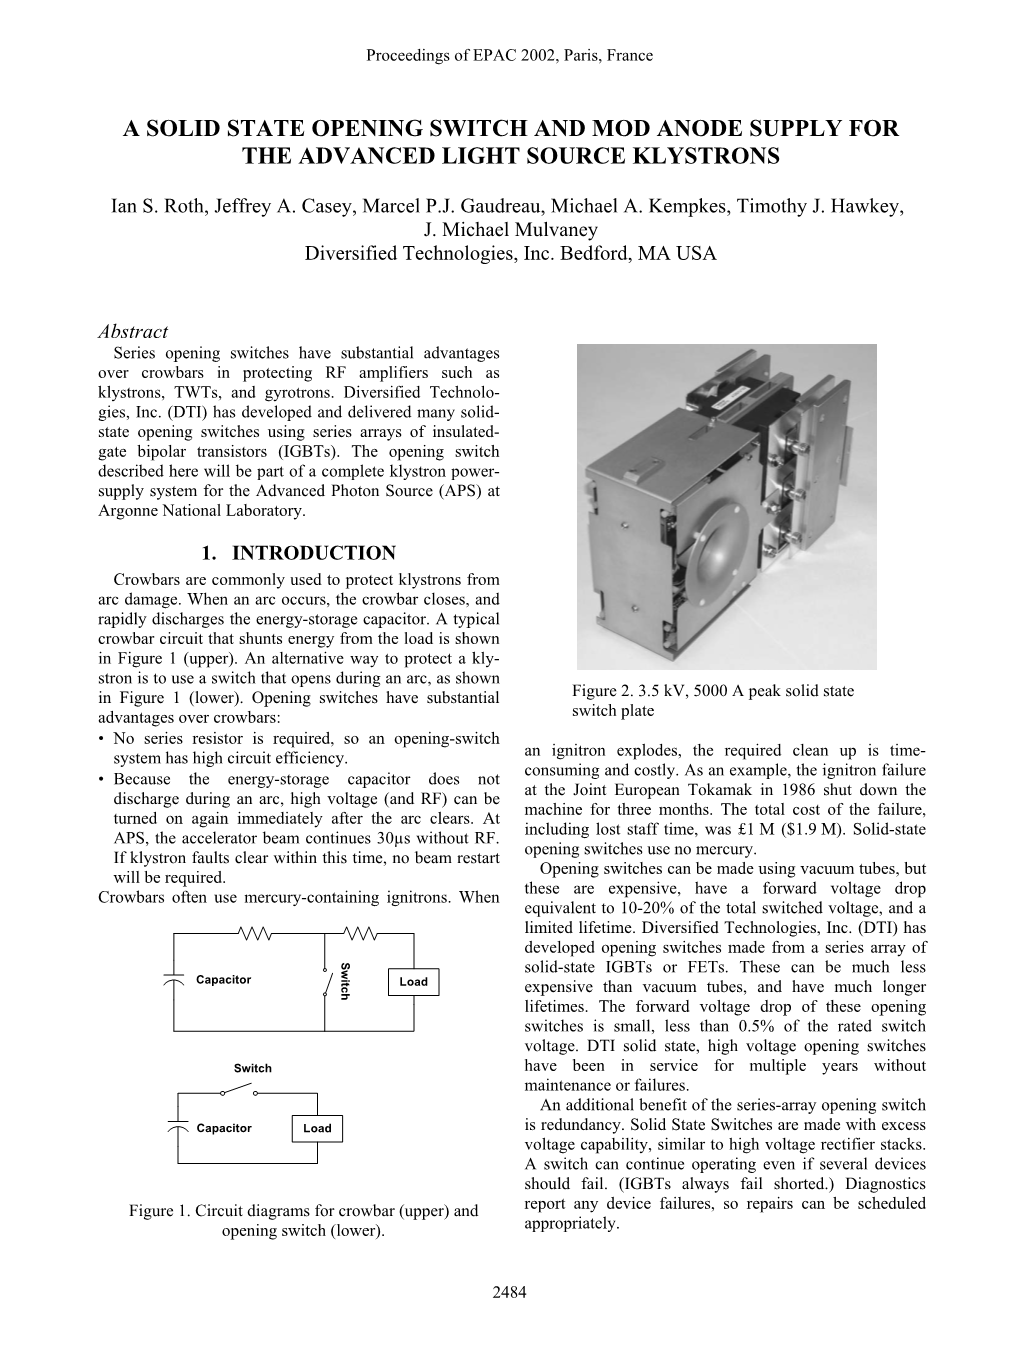 A Solid State Opening Switch and Mod Anode Supply for the Advanced Light Source Klystrons